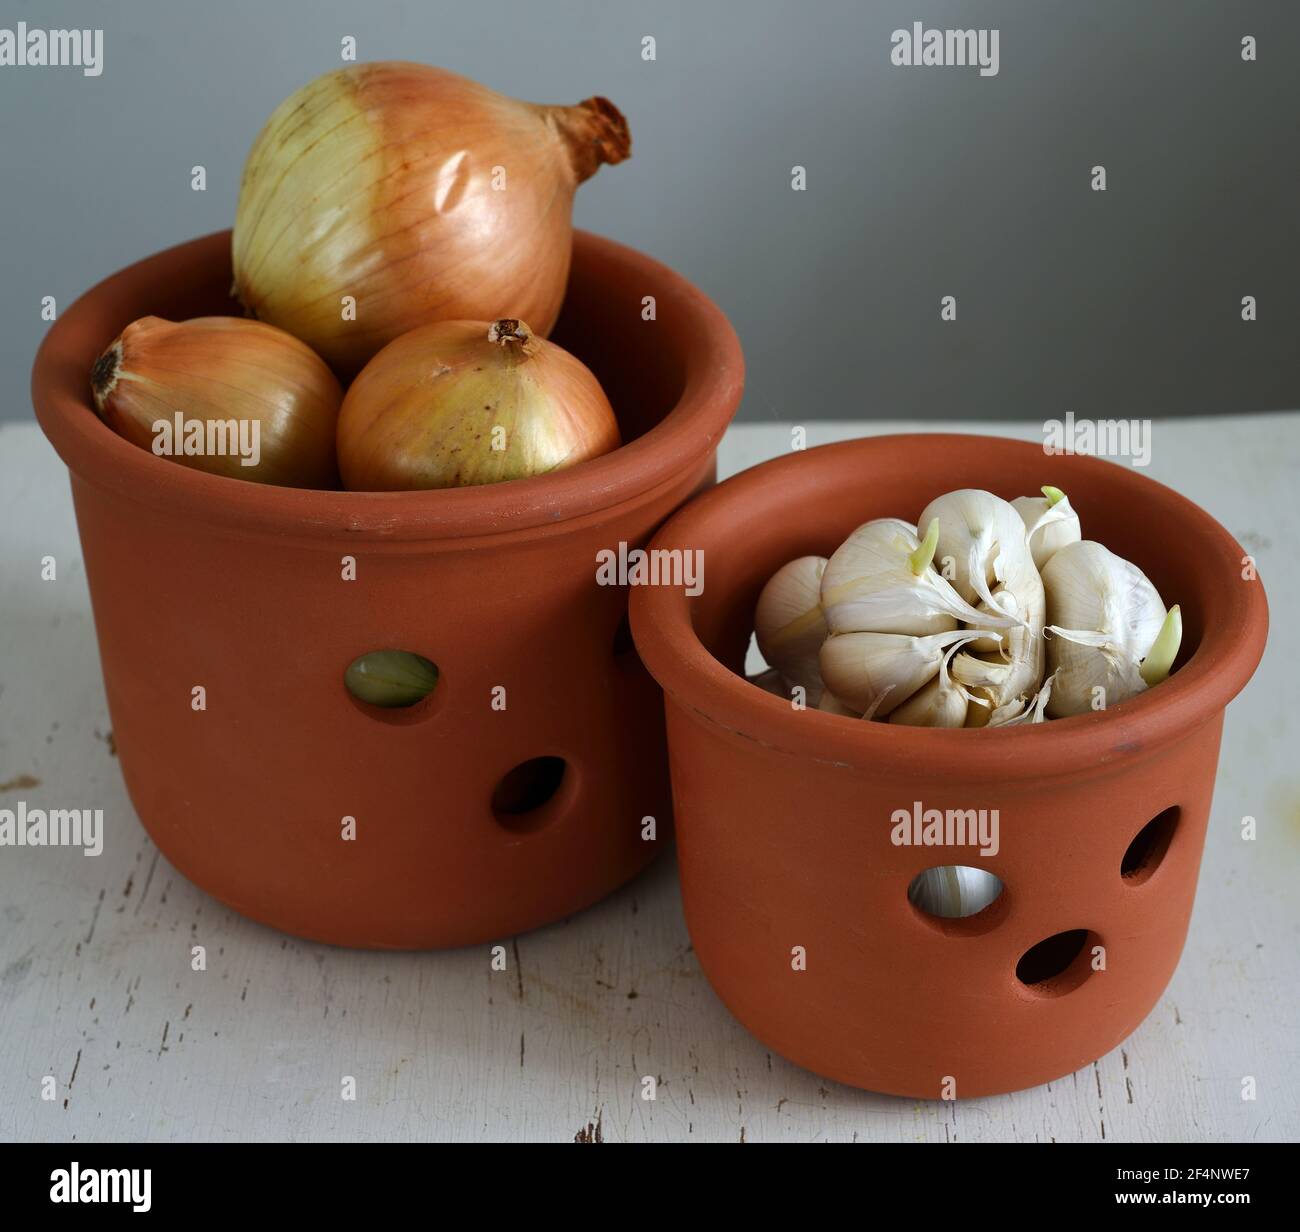 onions and garlic in brown ceramic pots Stock Photo